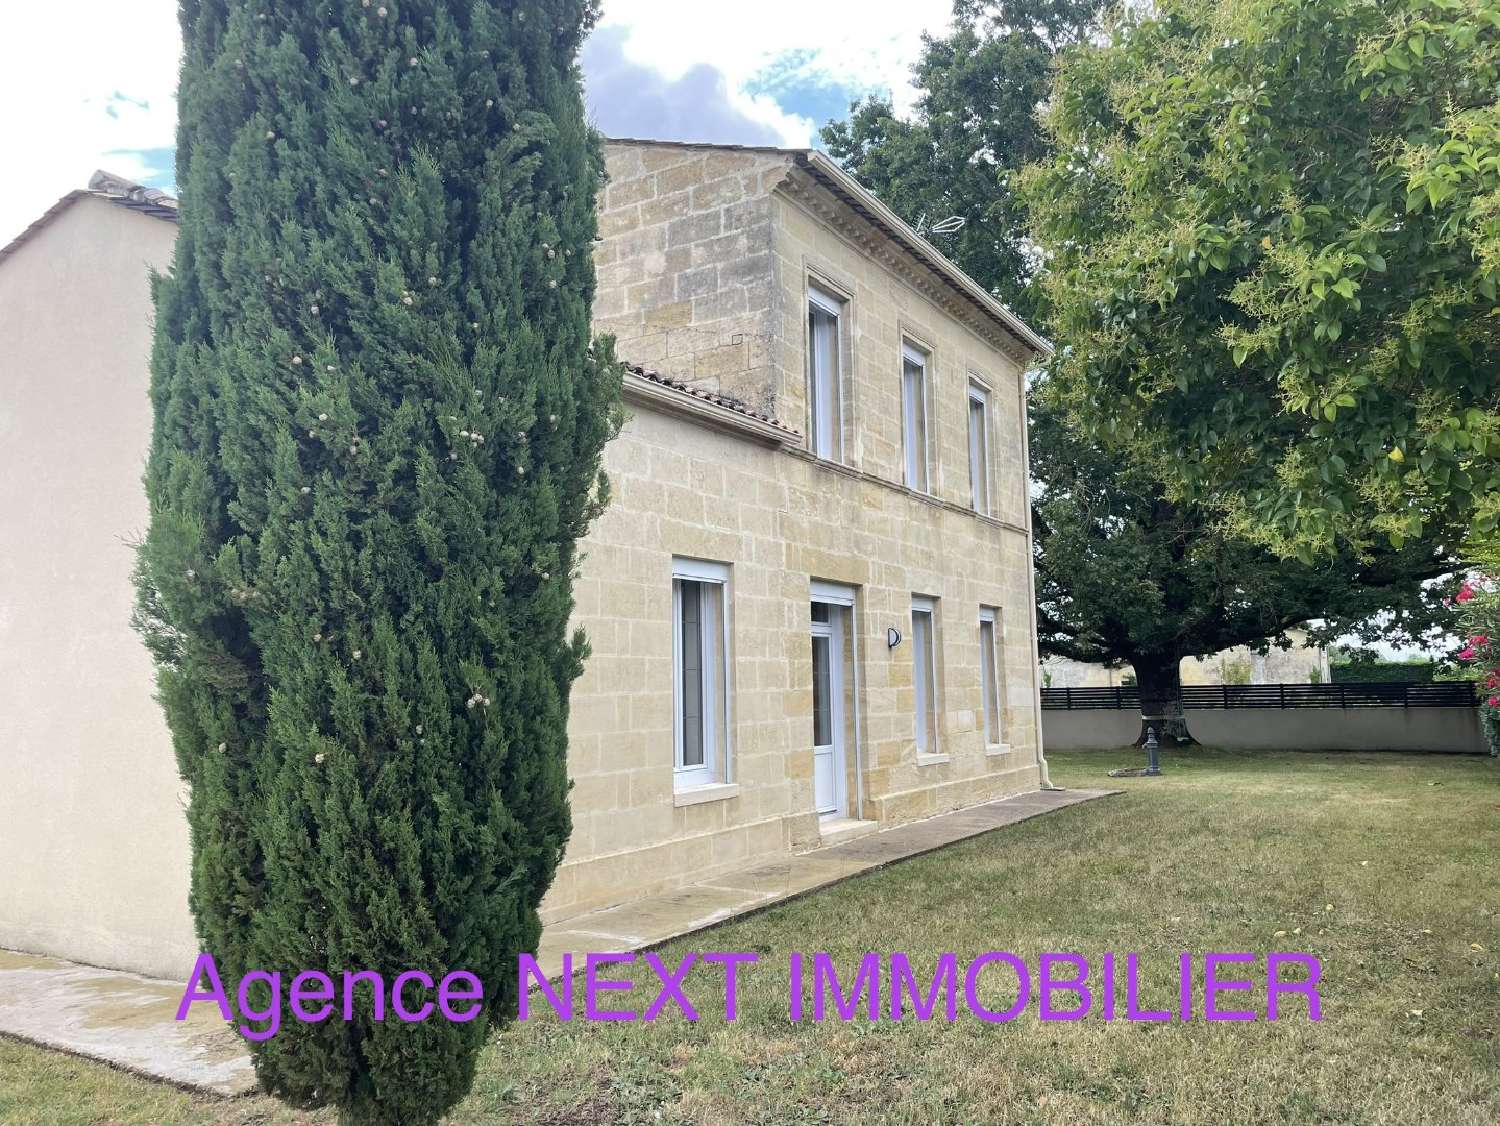  for sale house Libourne Gironde 1